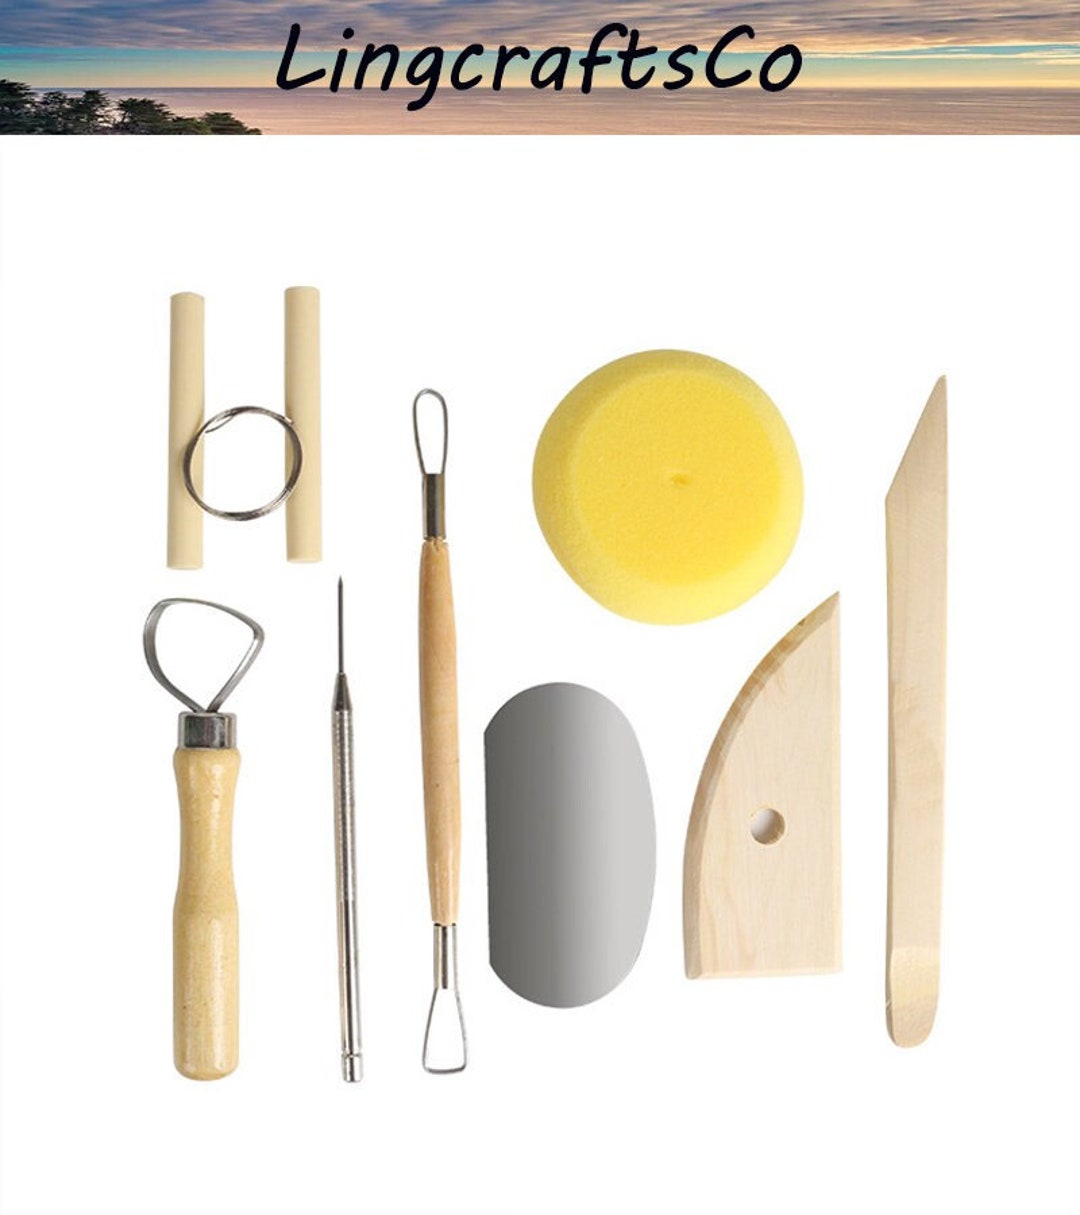 8pcs Clay Carving Tools Stainless Steel Scraper Pottery Ceramic Tools  Handmade Practical Sponge for Children Students DIY Crafts